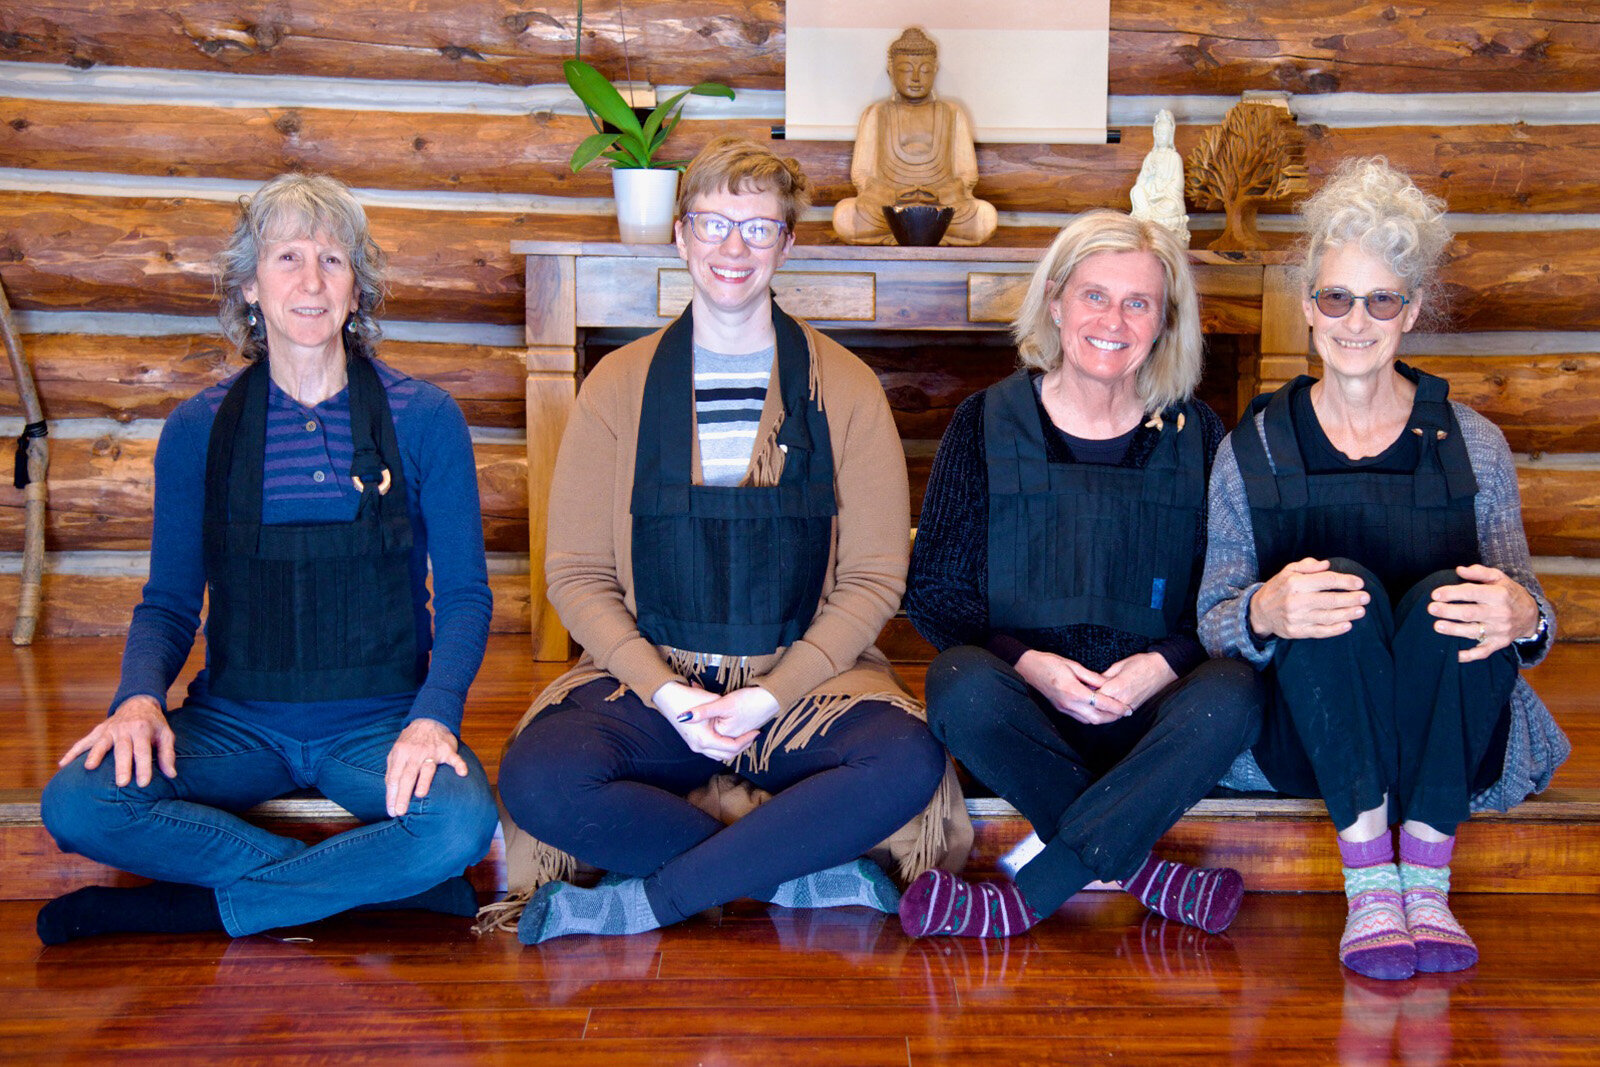 On Saturday, during our Rohatsu Sesshin, we celebrated our Jukai ceremony where four Eon Zen Center members received the Buddhist Precepts and dharma names. Congratulations! 

  Cynthia Shoshin (True Heart-Mind) Bonney
  Amy Eshun (Wisdom Spring) Abe